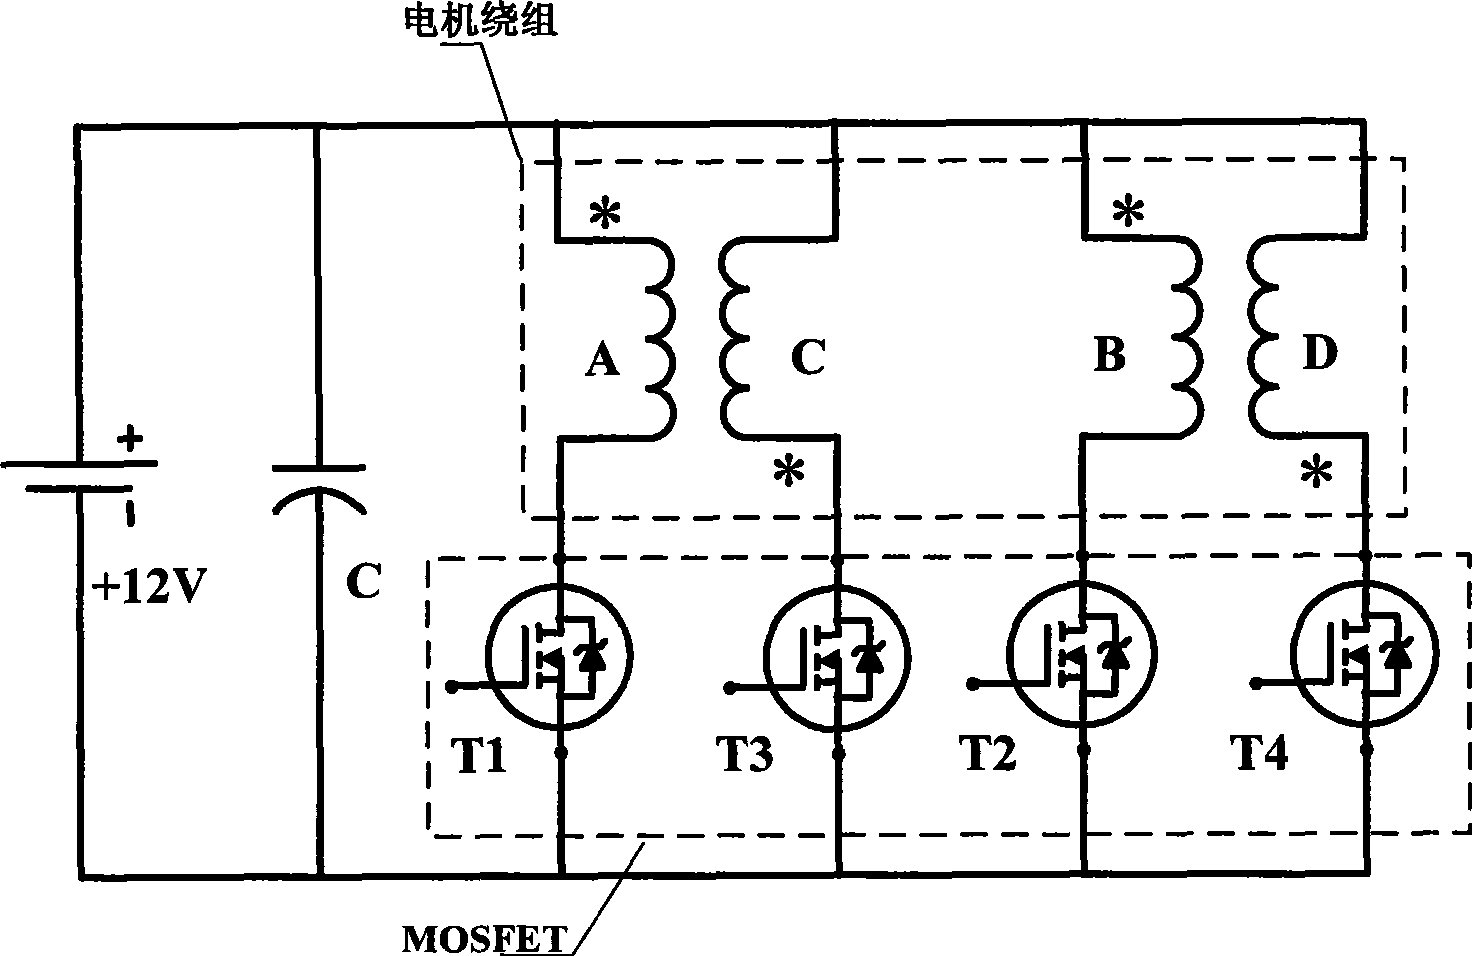 Automobile engine cooling fan control system based on four-phase double-wire winding brushless DC motor